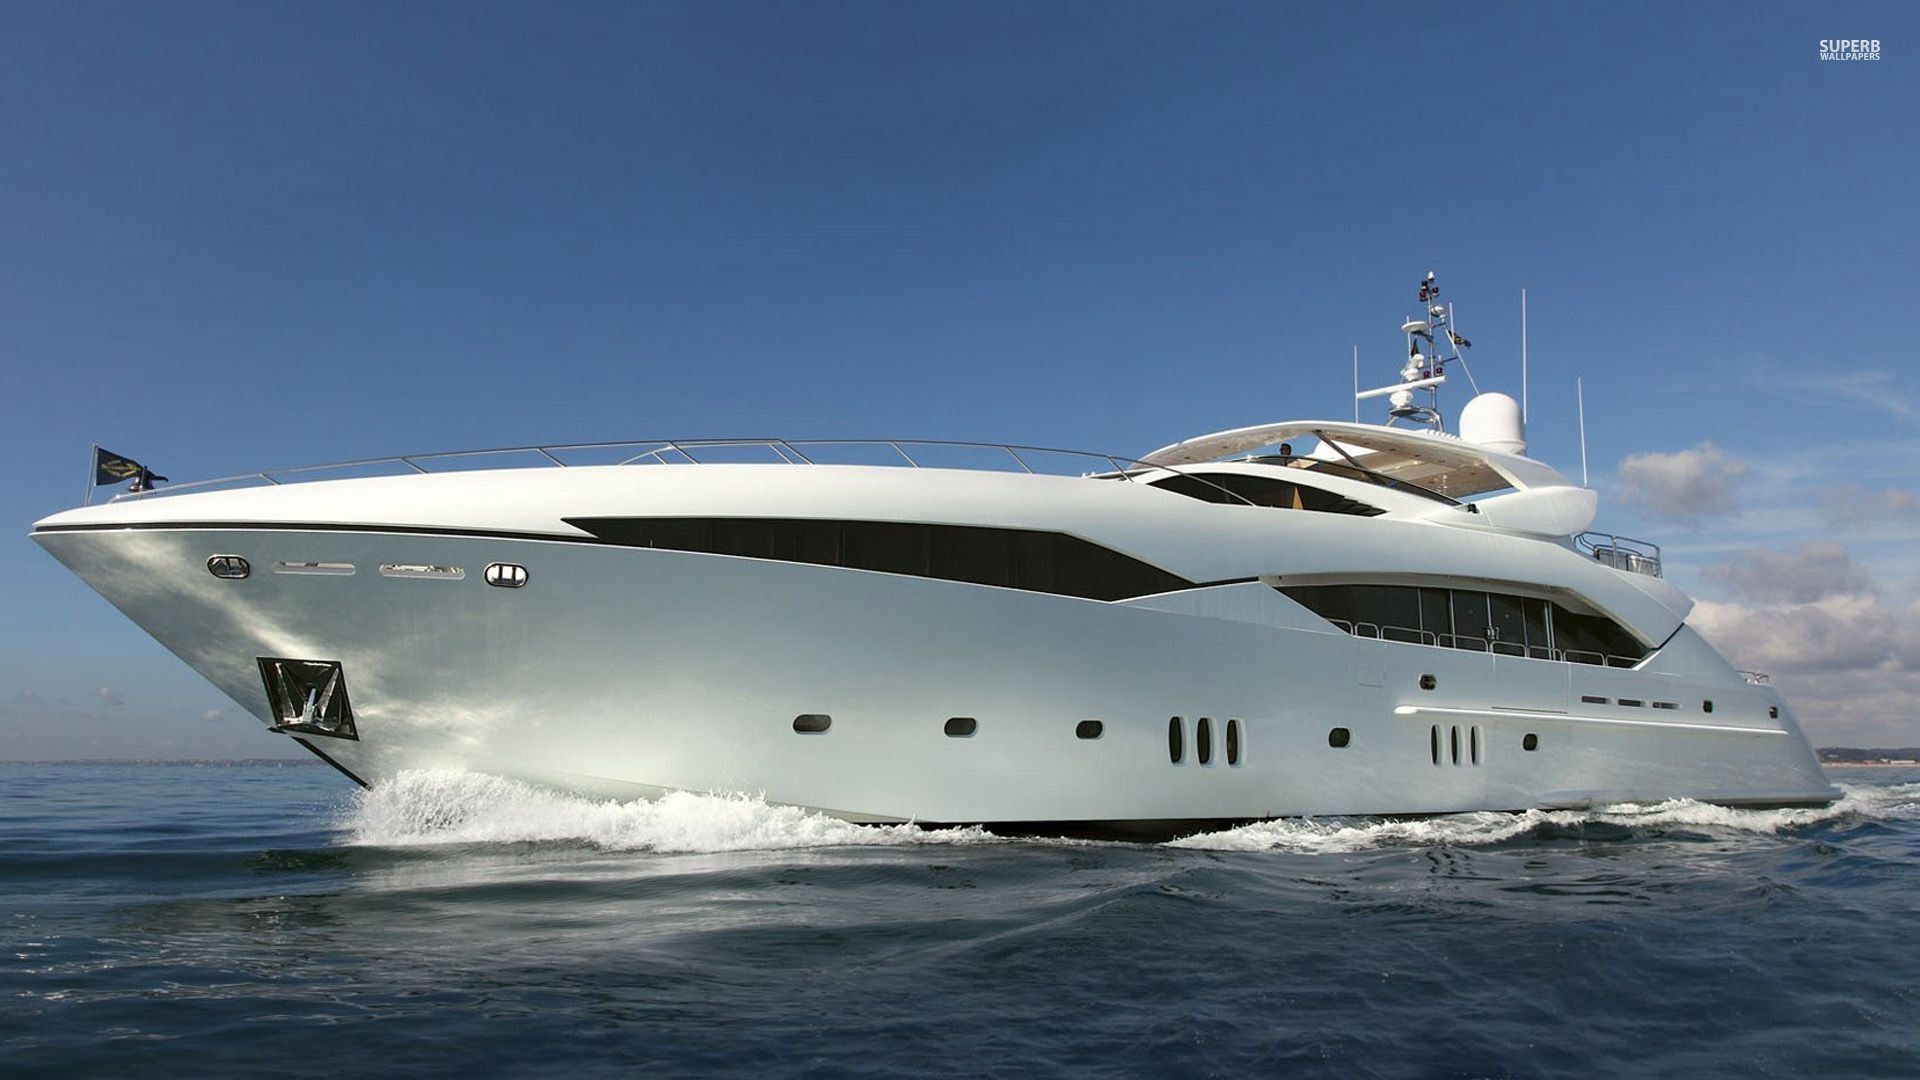 Luxury yacht wallpaper - Photography wallpapers - #29213